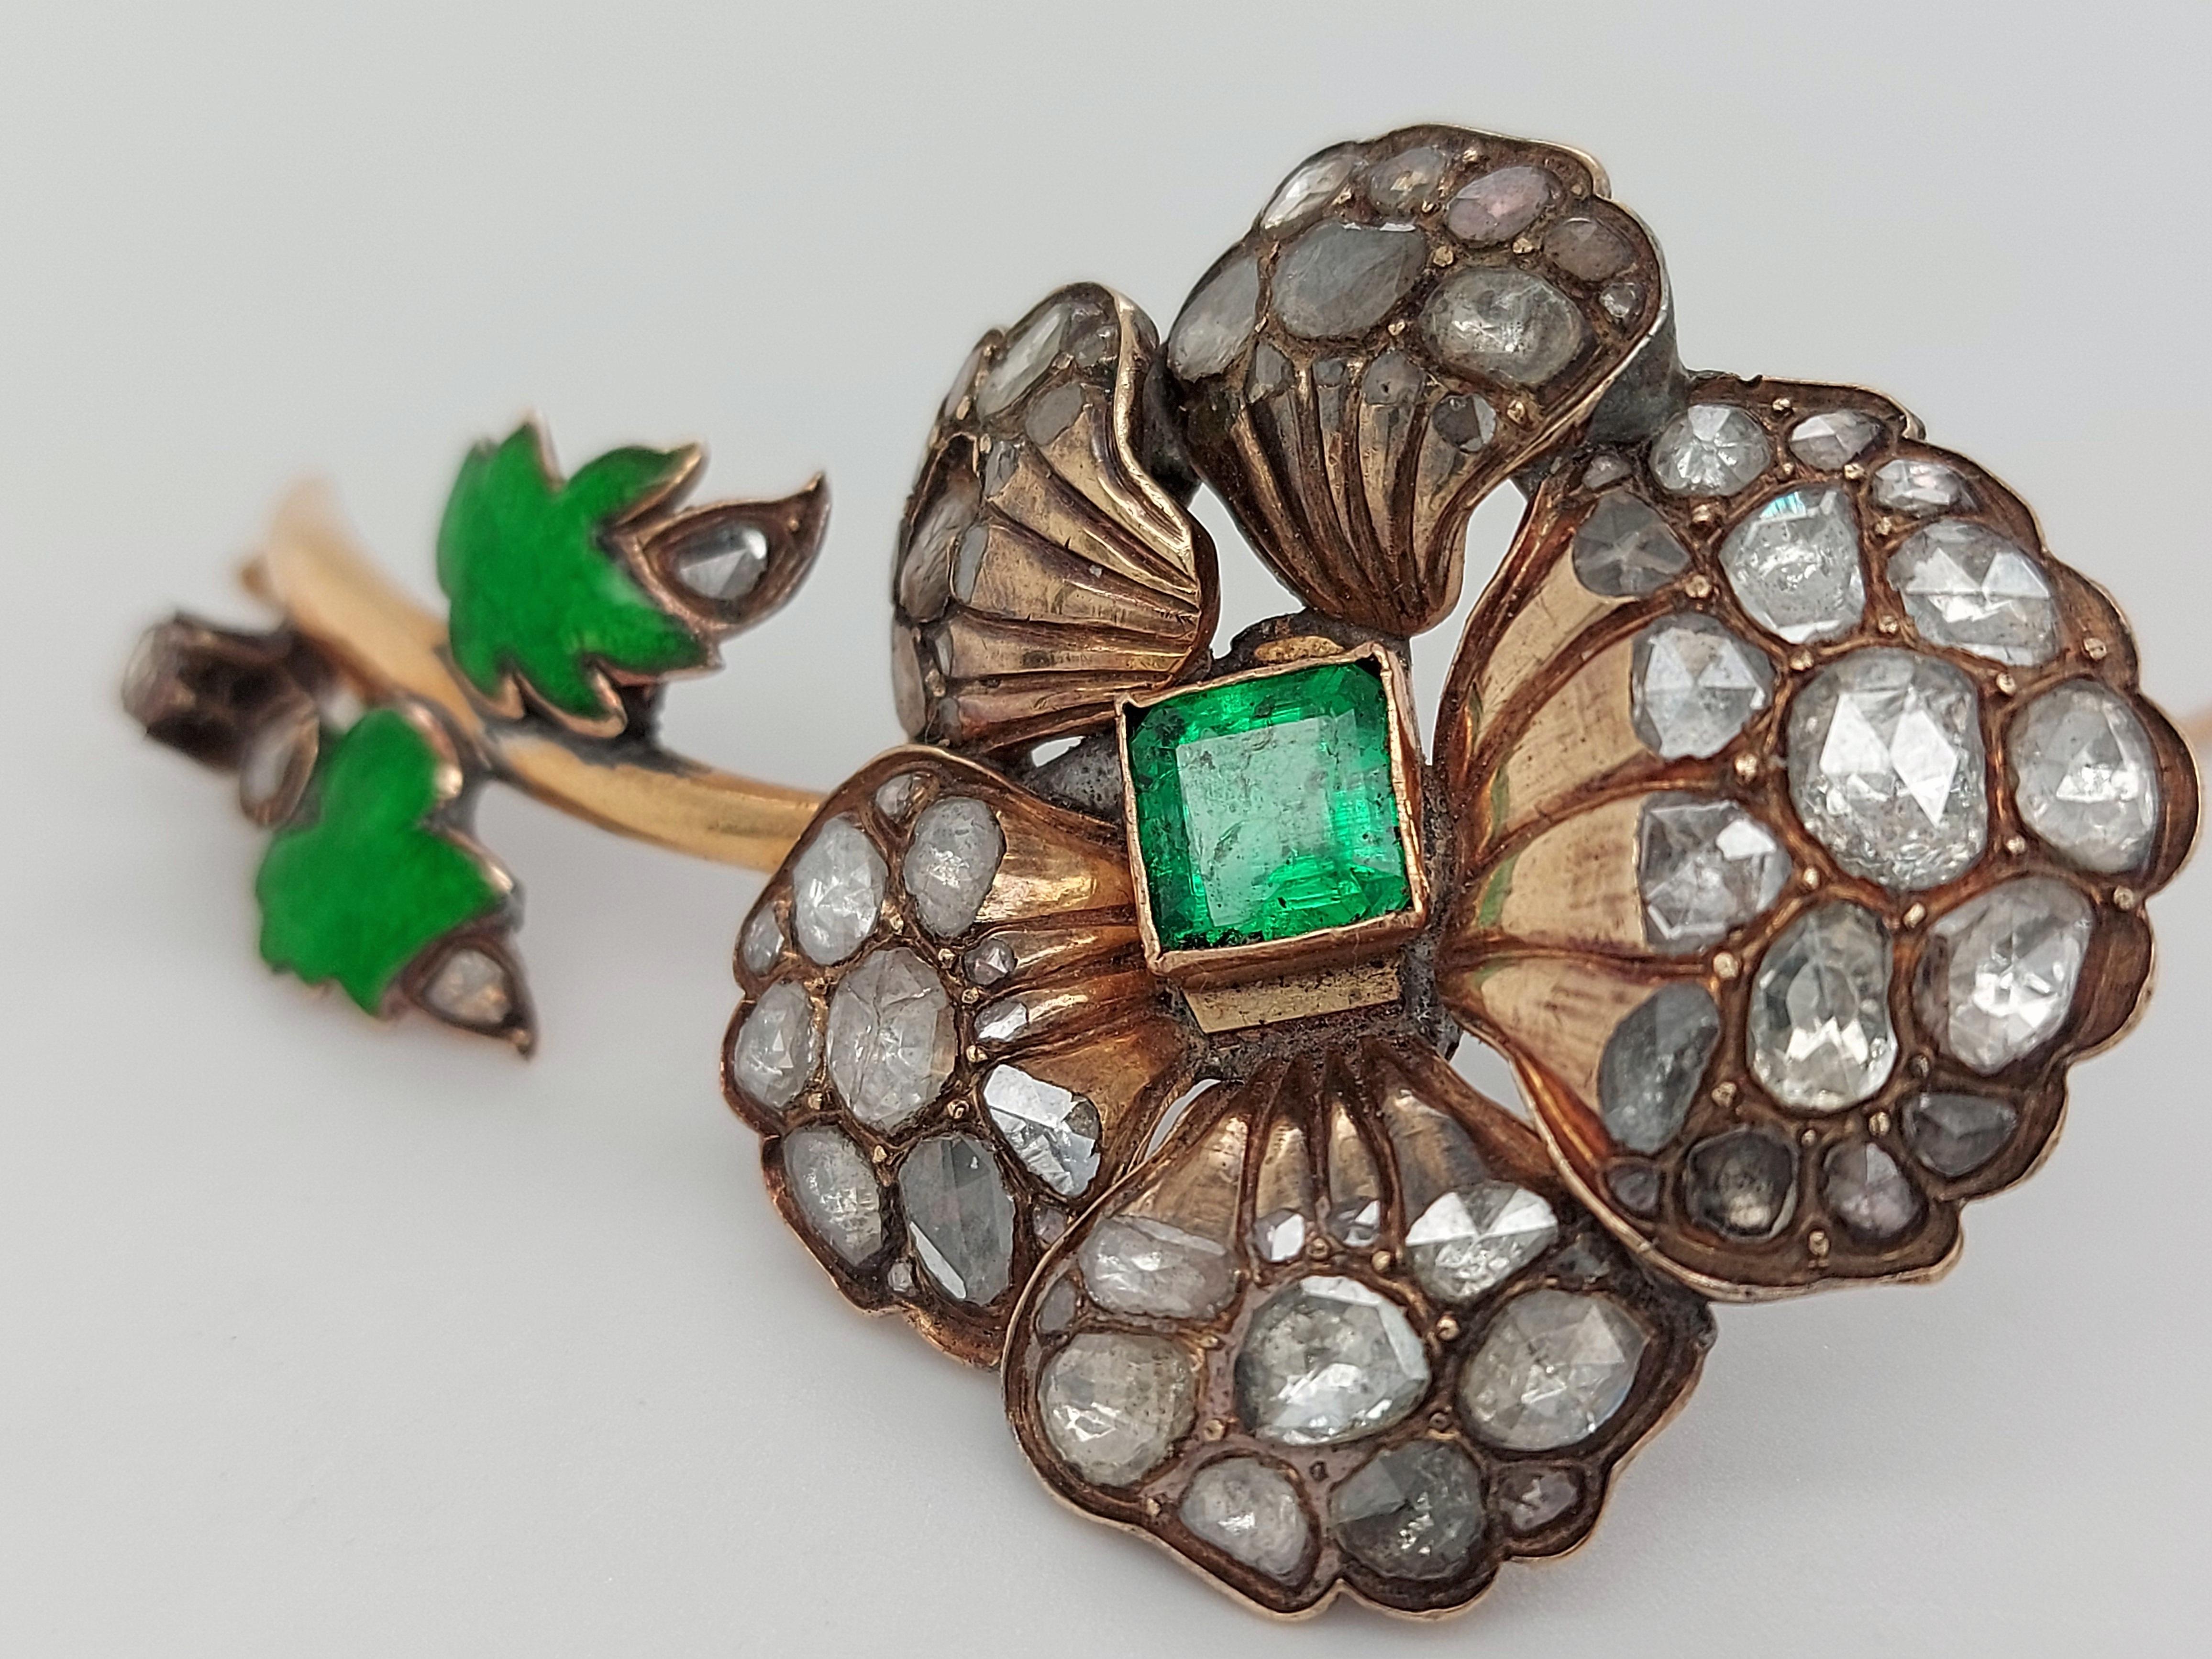 Silver and 14kt Gold Flower Brooch, Rose Cut Diamonds, Colombia Emerald, Enamel For Sale 5